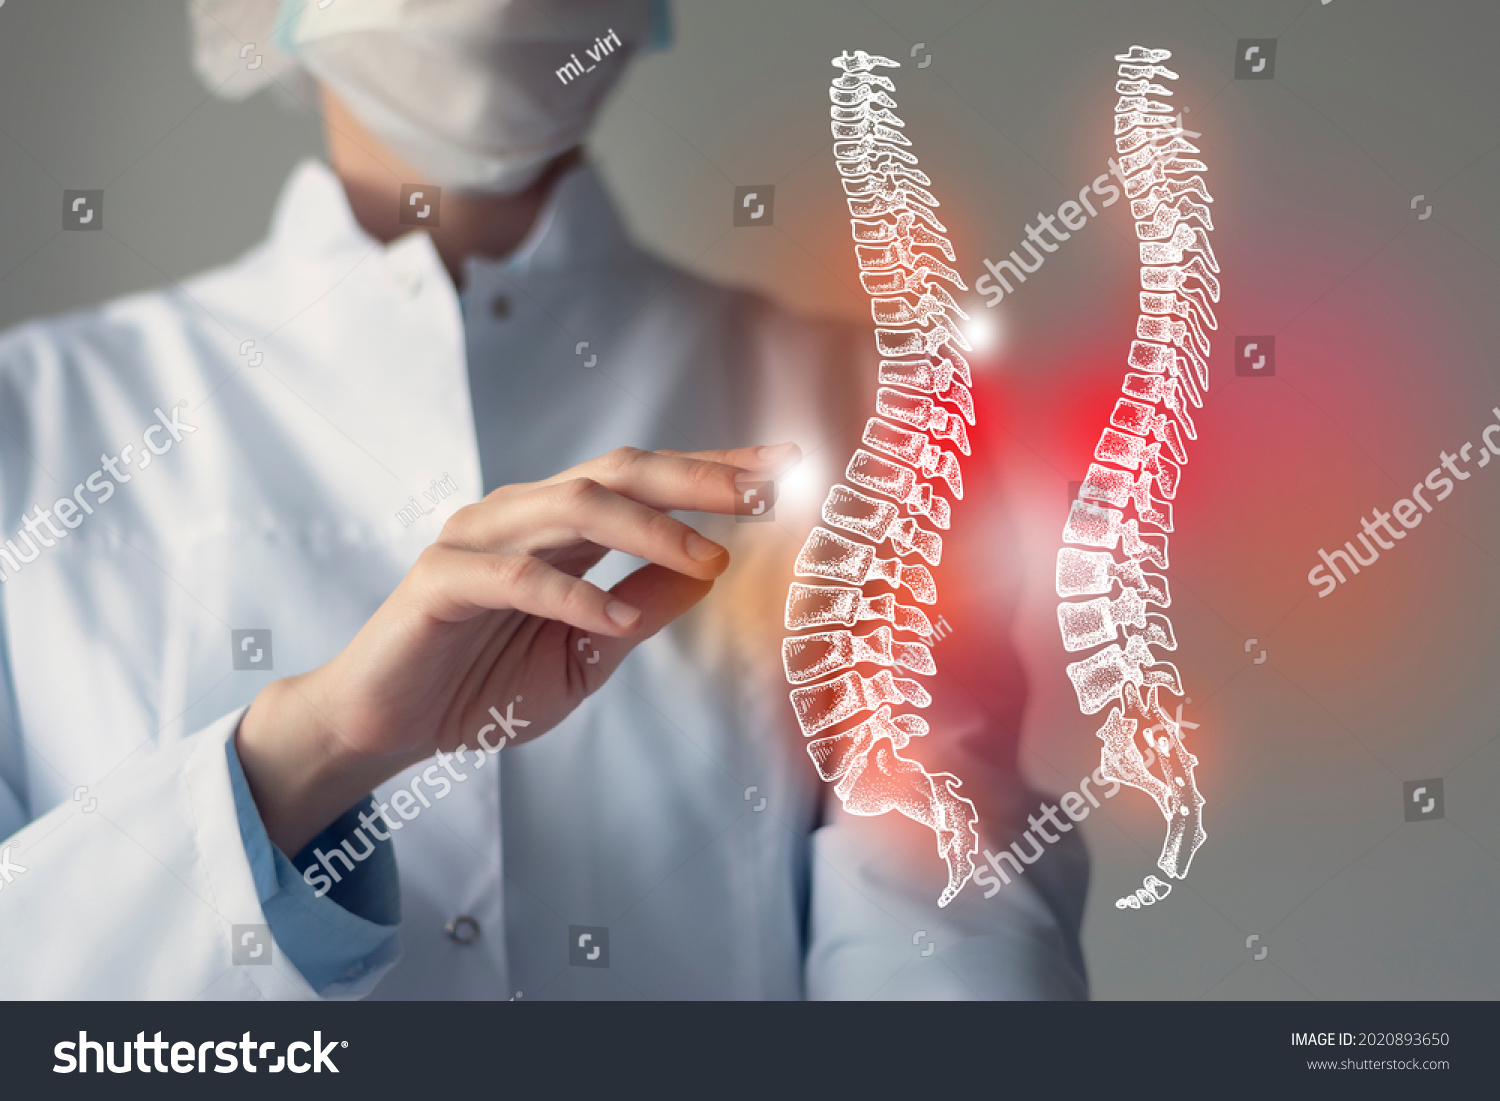 Female doctor touches virtual Spine in hand. Blurred photo, handrawn human organ, highlighted red as symbol of disease. Healthcare hospital service concept stock photo #2020893650